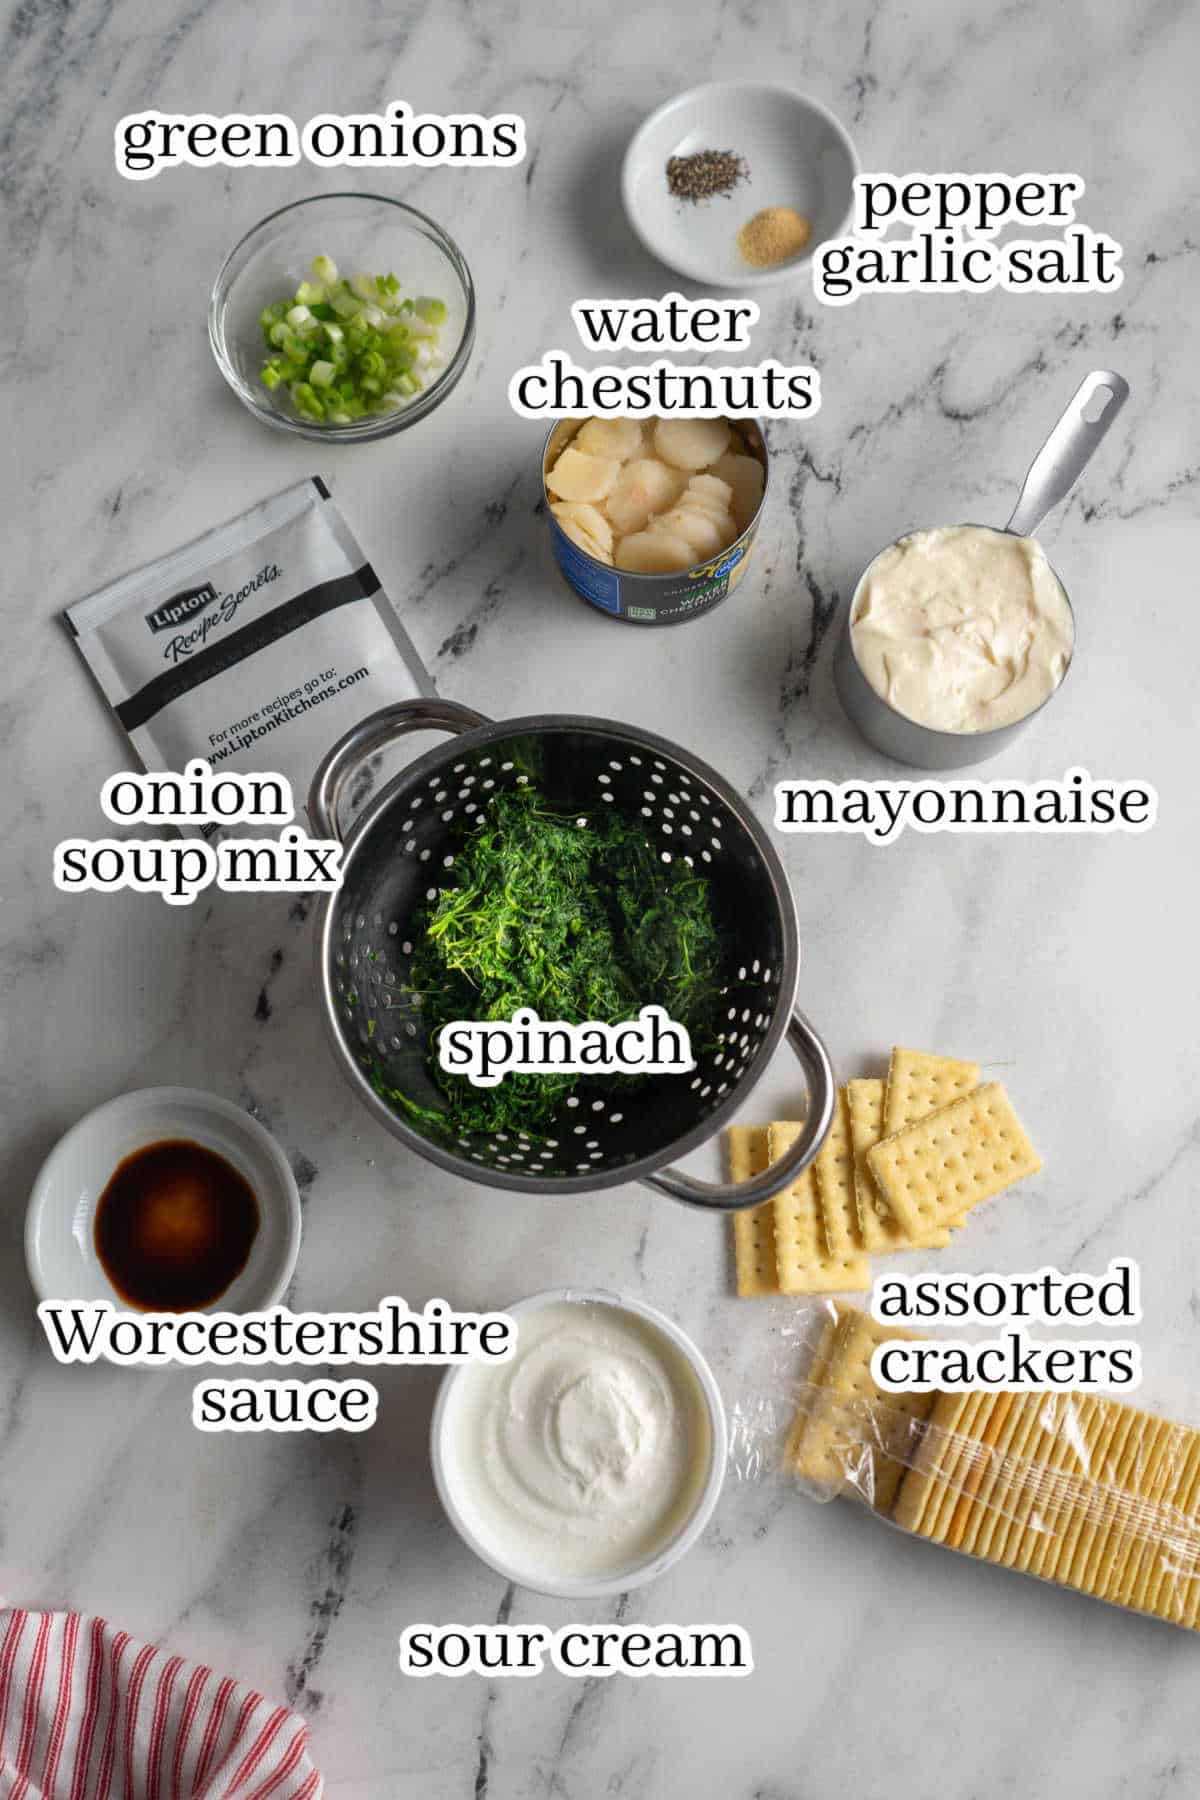 The ingredients needed to make the dip recipe, with print overlay for clarification.